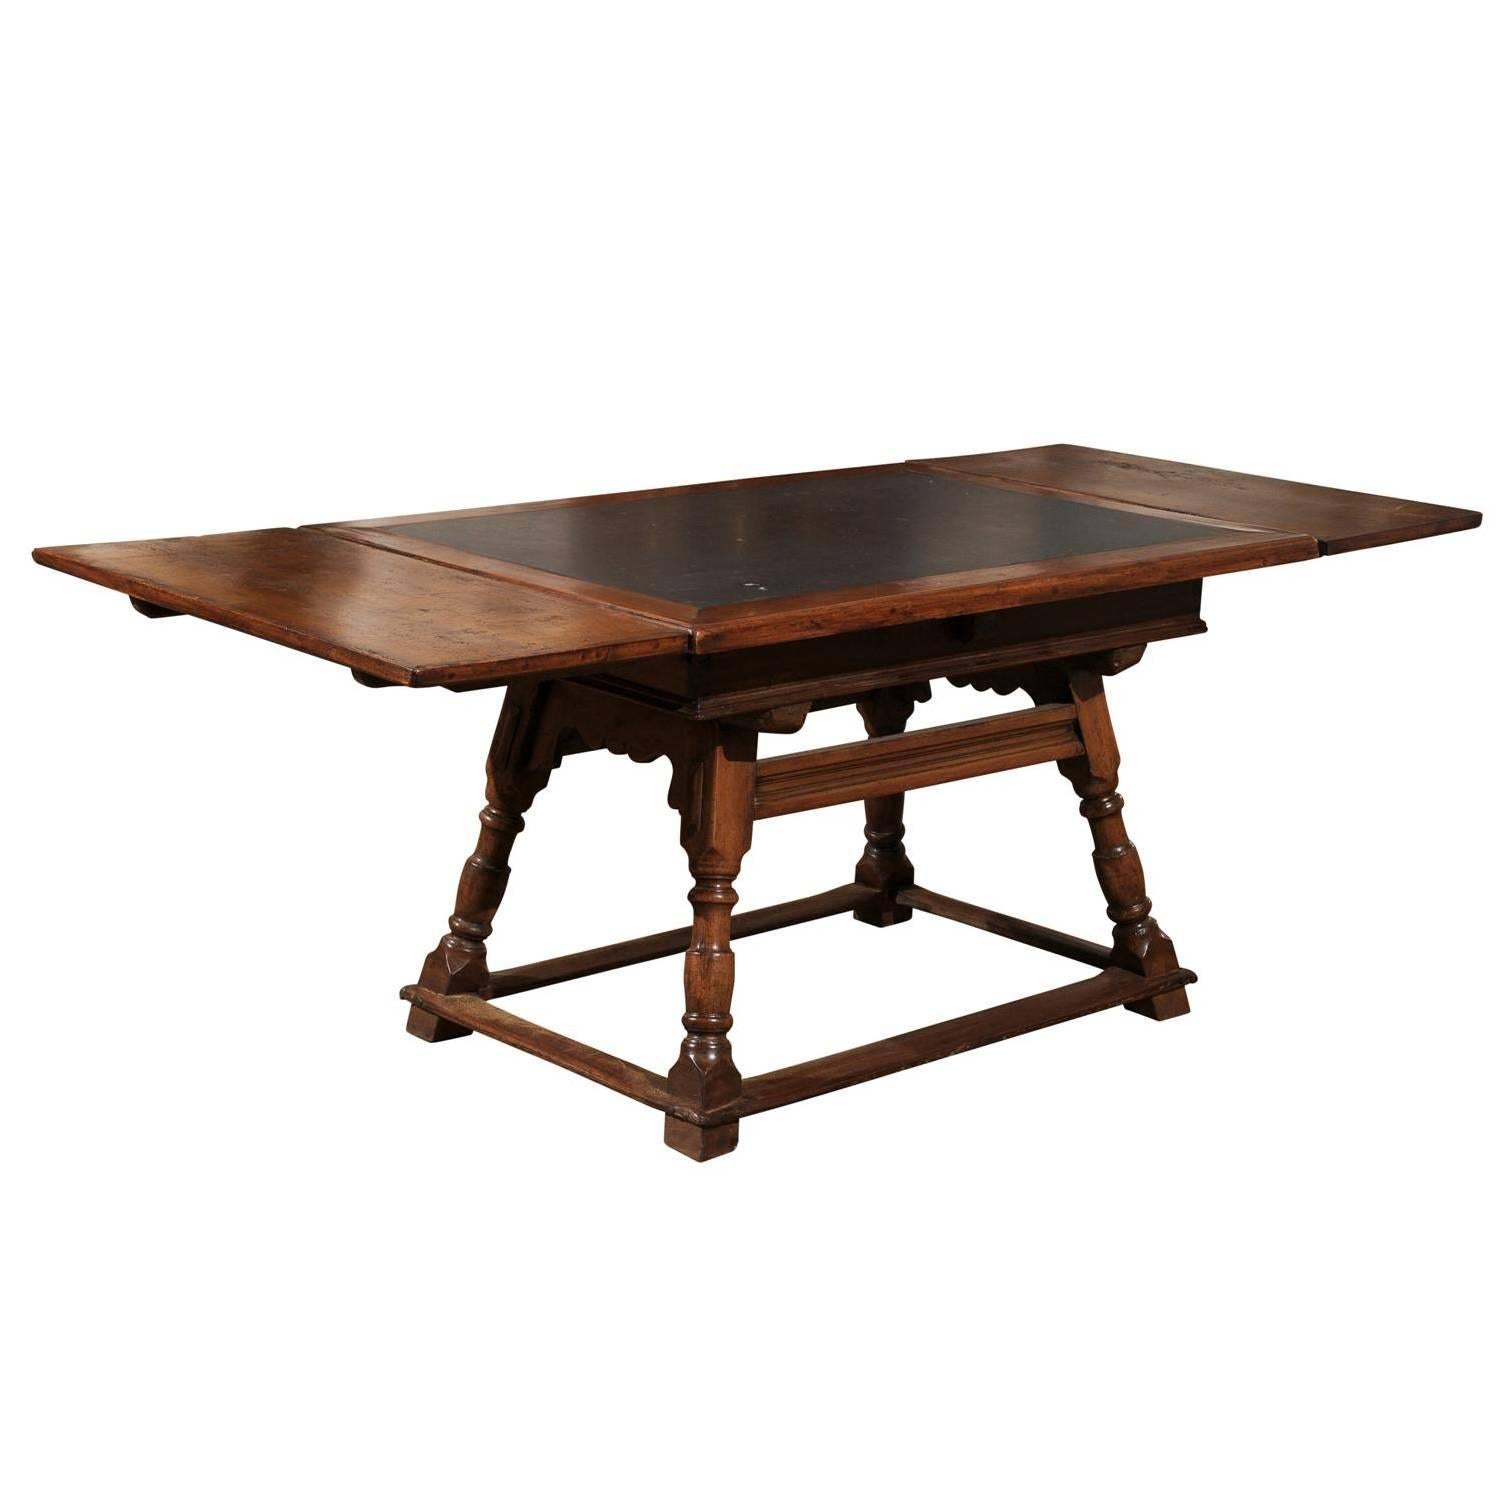 Swiss Wooden Draw-Leaf Extension Dining Table with Inset Slate Top, circa 1820